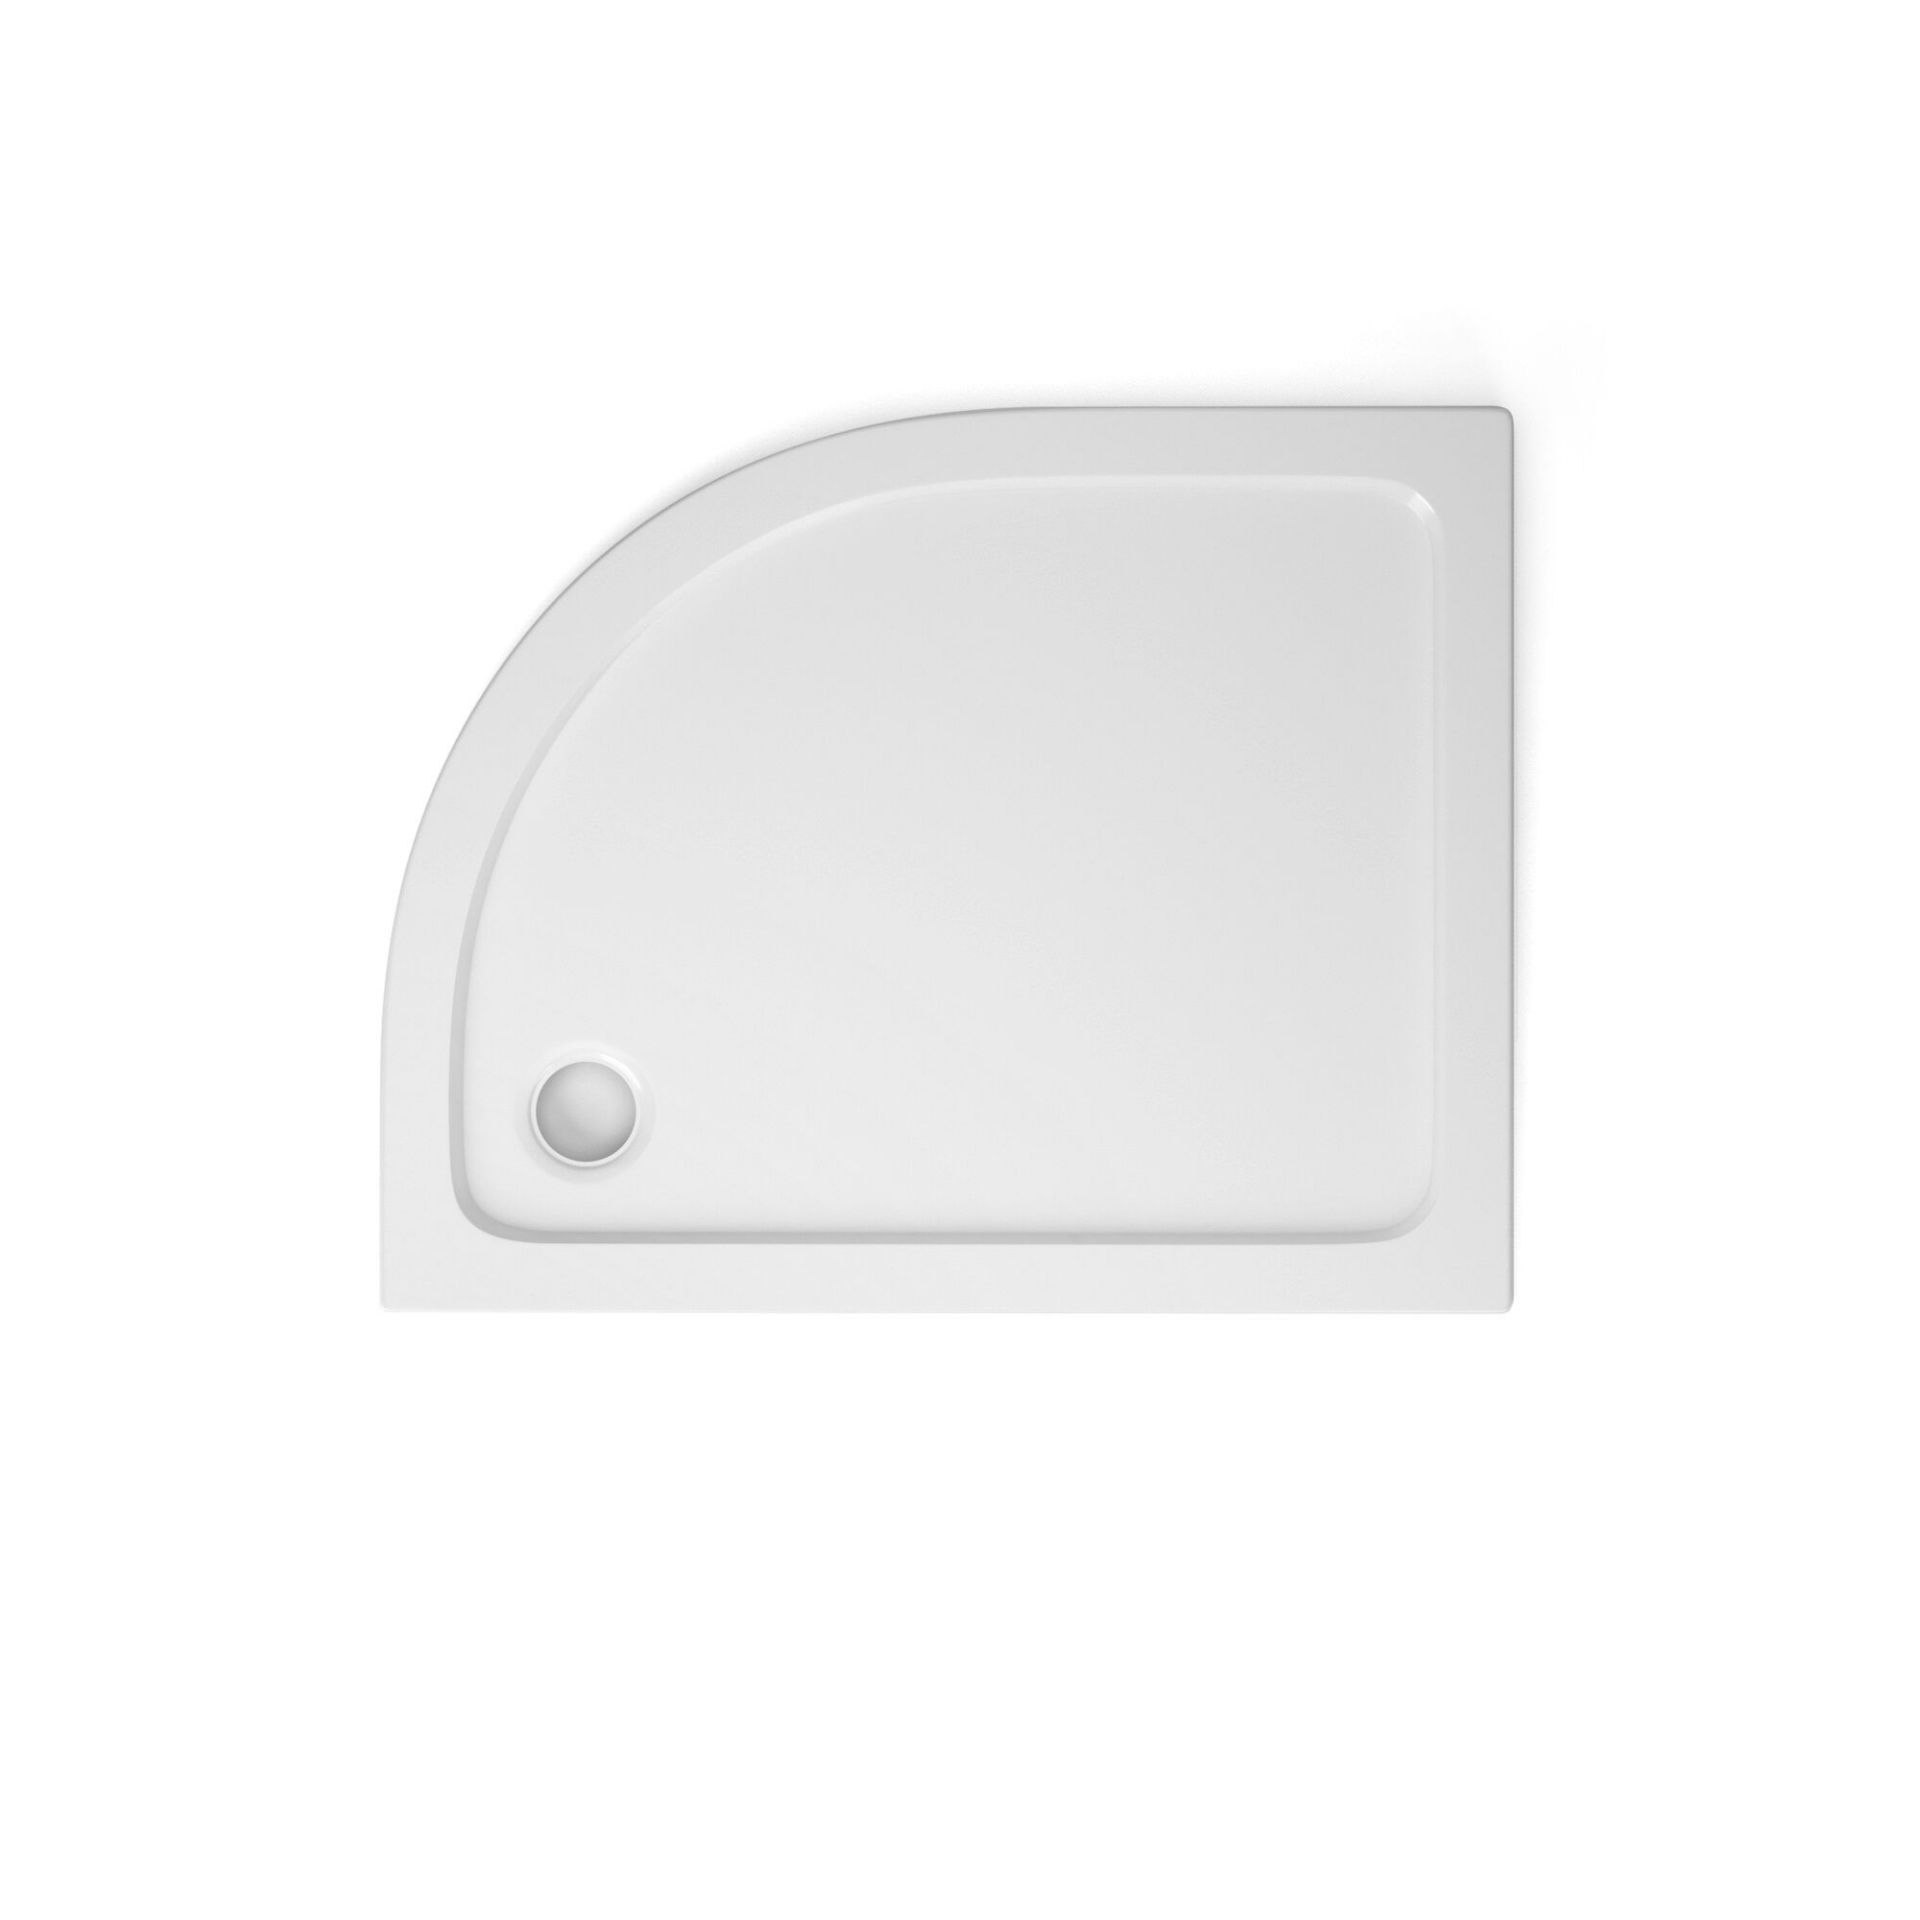 (TT196) 1000x800mm Offset Quadrant Ultra Slim Shower Tray - Right. Constructed from acrylic ca...